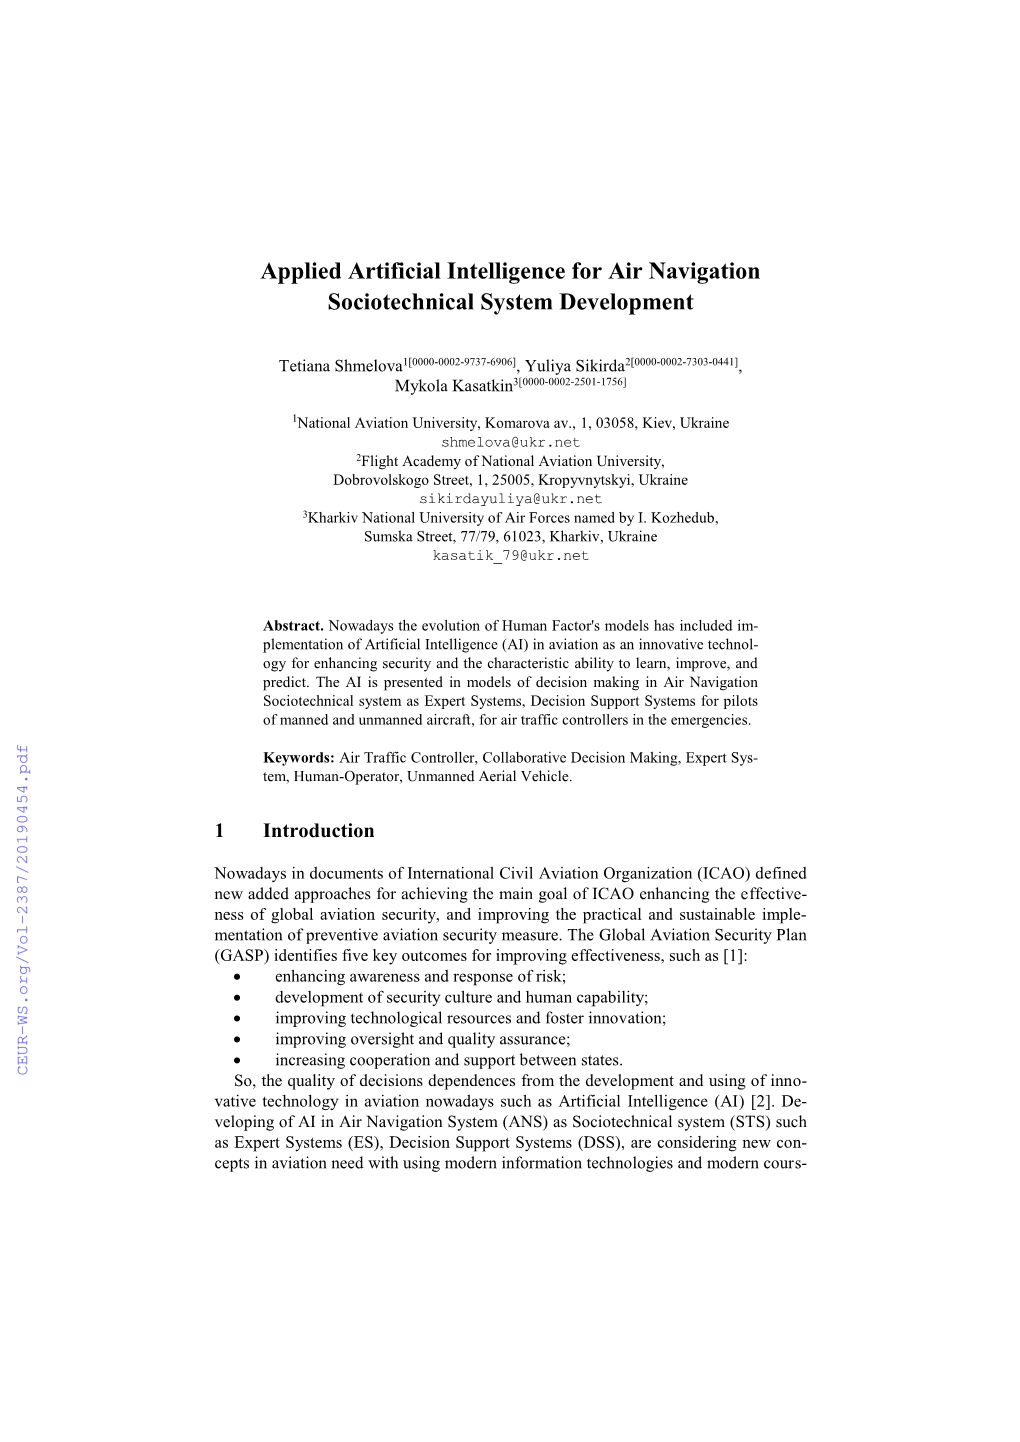 Applied Artificial Intelligence for Air Navigation Sociotechnical System Development